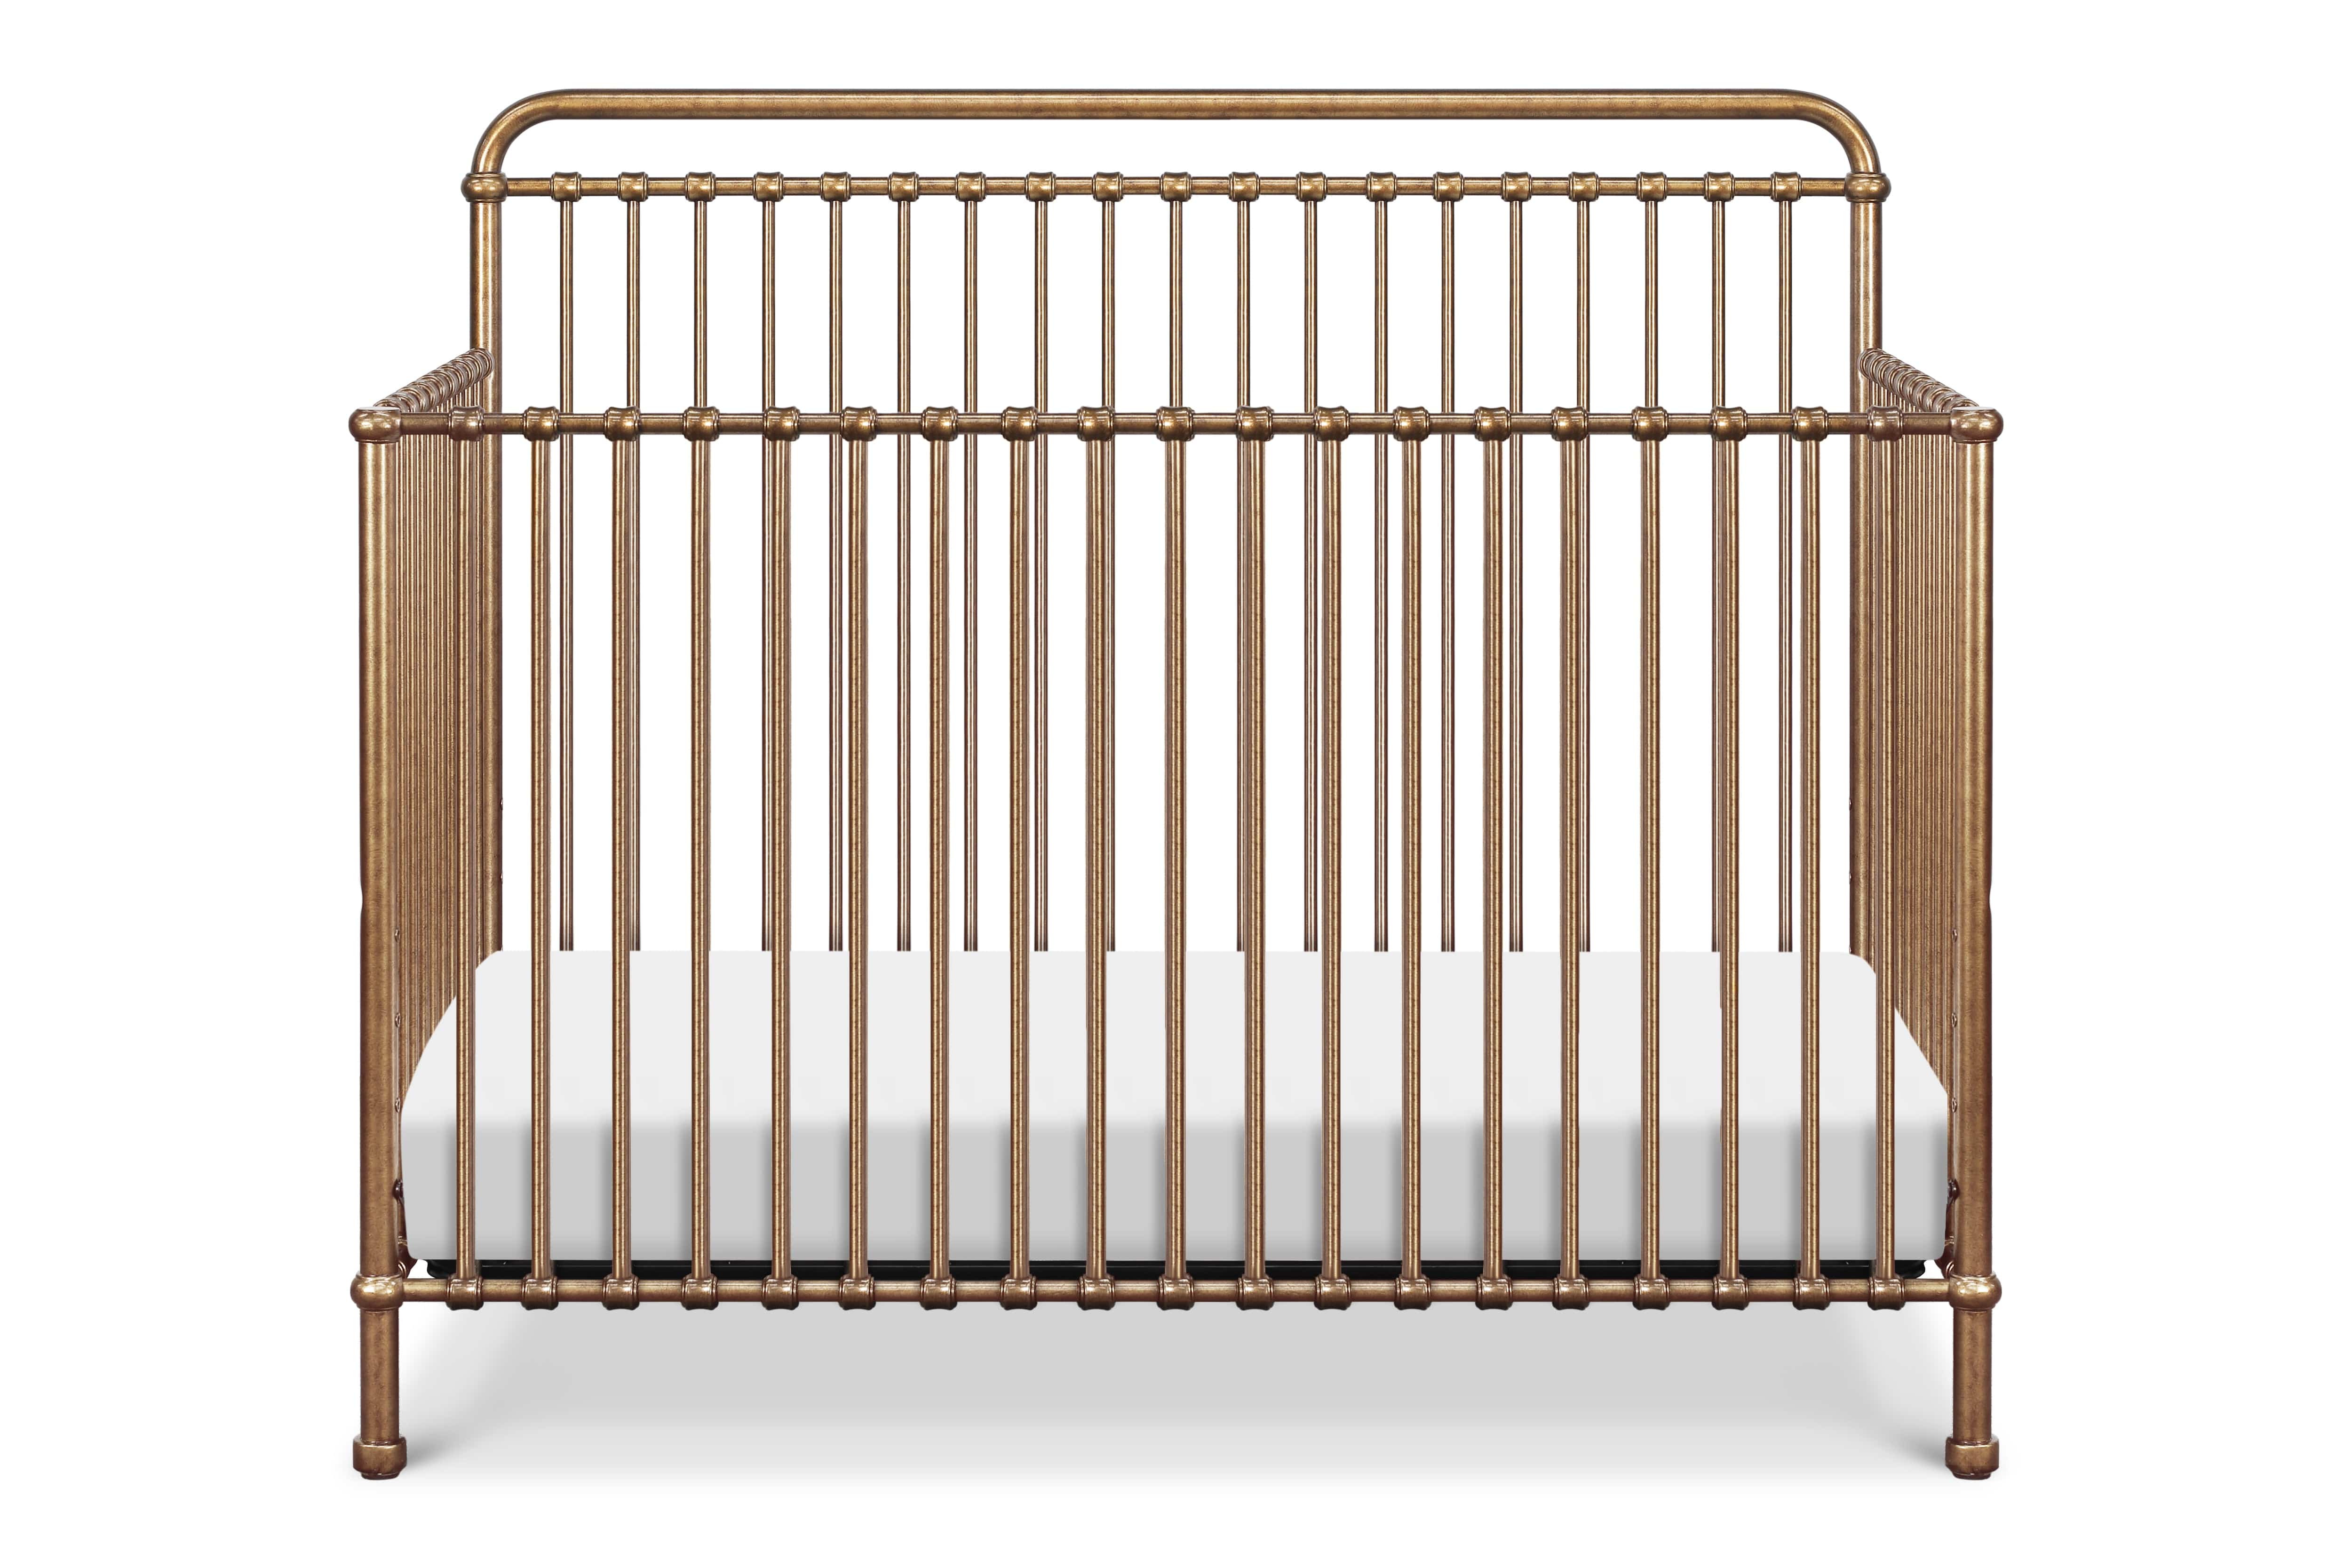 Winston 4-1 Convertible Crib in Vintage Gold - Twinkle Twinkle Little One